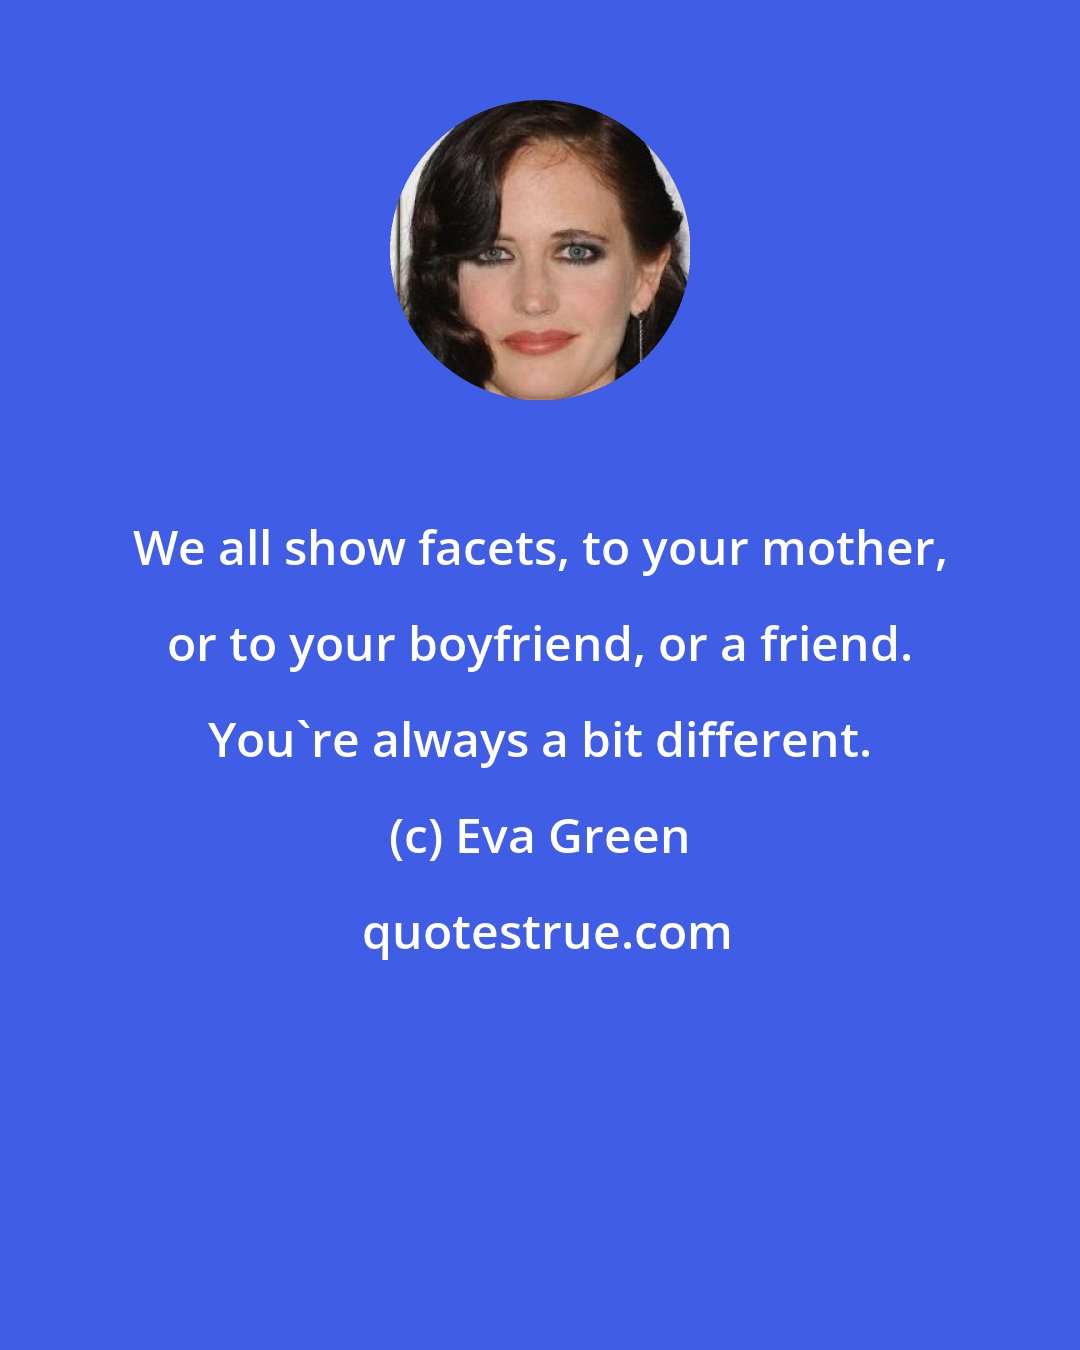 Eva Green: We all show facets, to your mother, or to your boyfriend, or a friend. You're always a bit different.